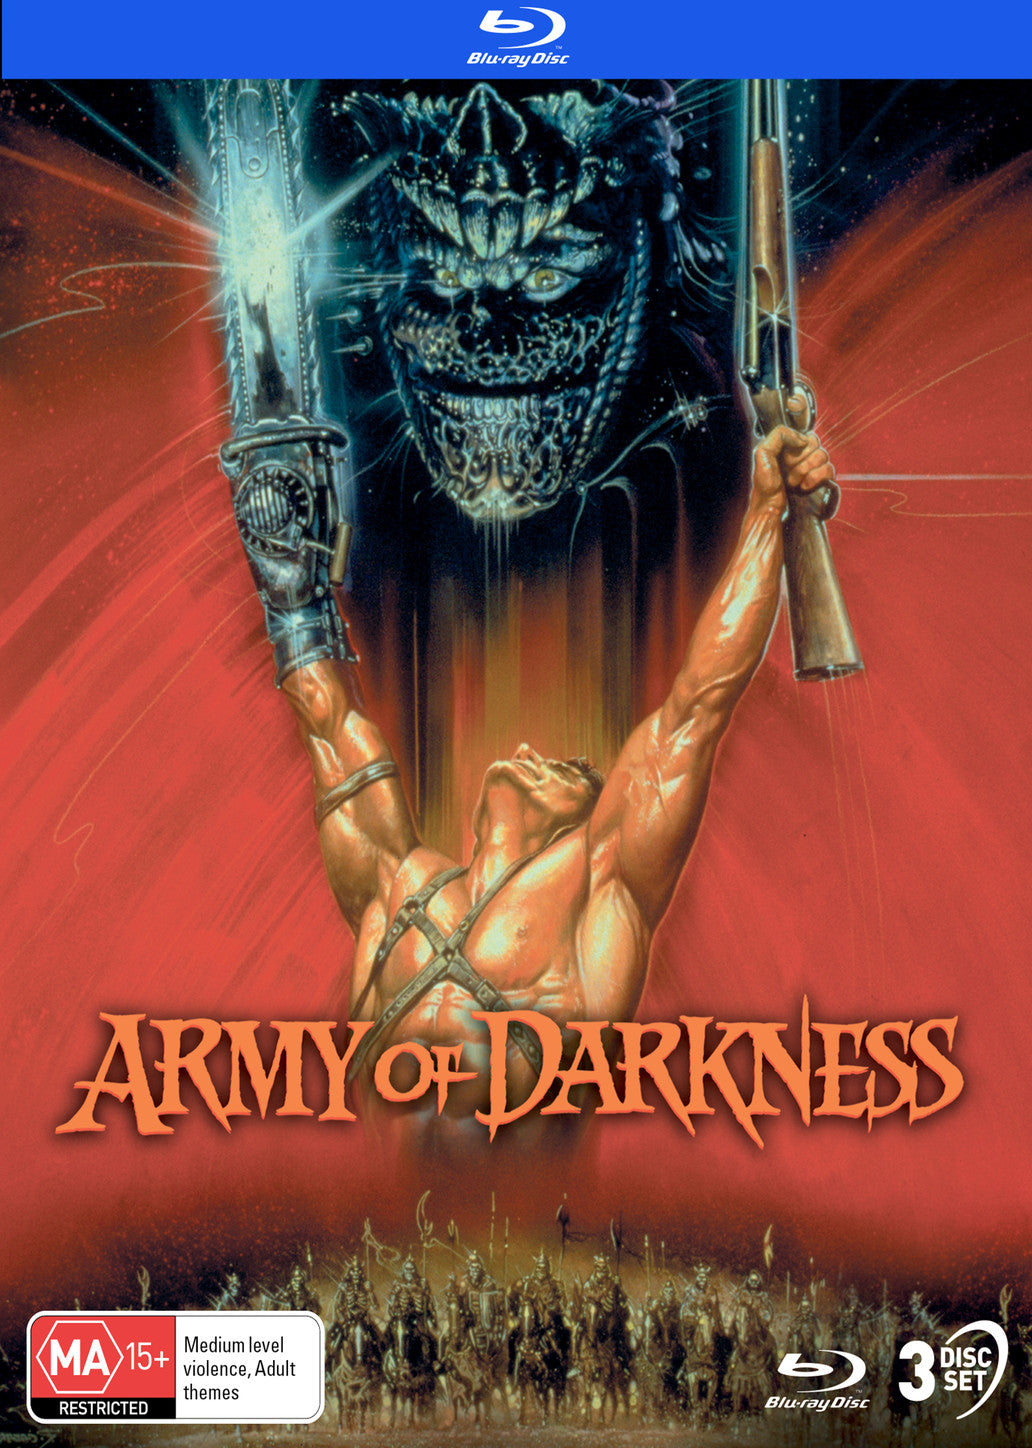 ARMY OF DARKNESS - SPECIAL EDITION BLU-RAY